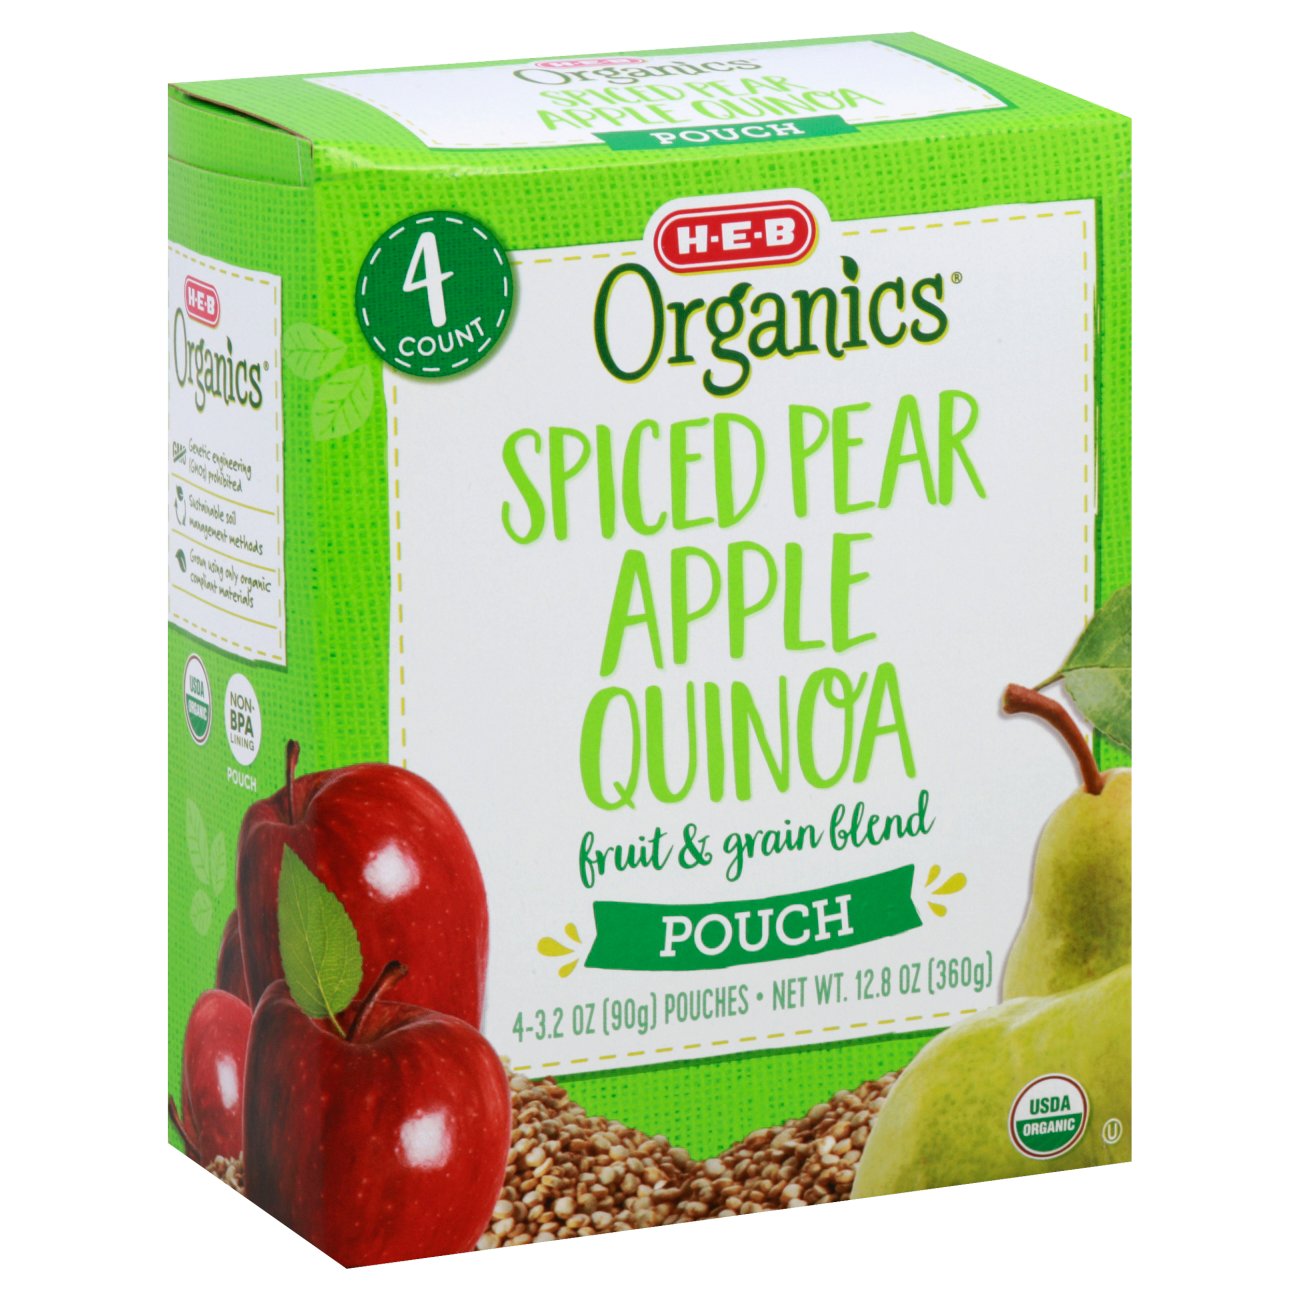 Organic Apples & Pears – Boxed Greens